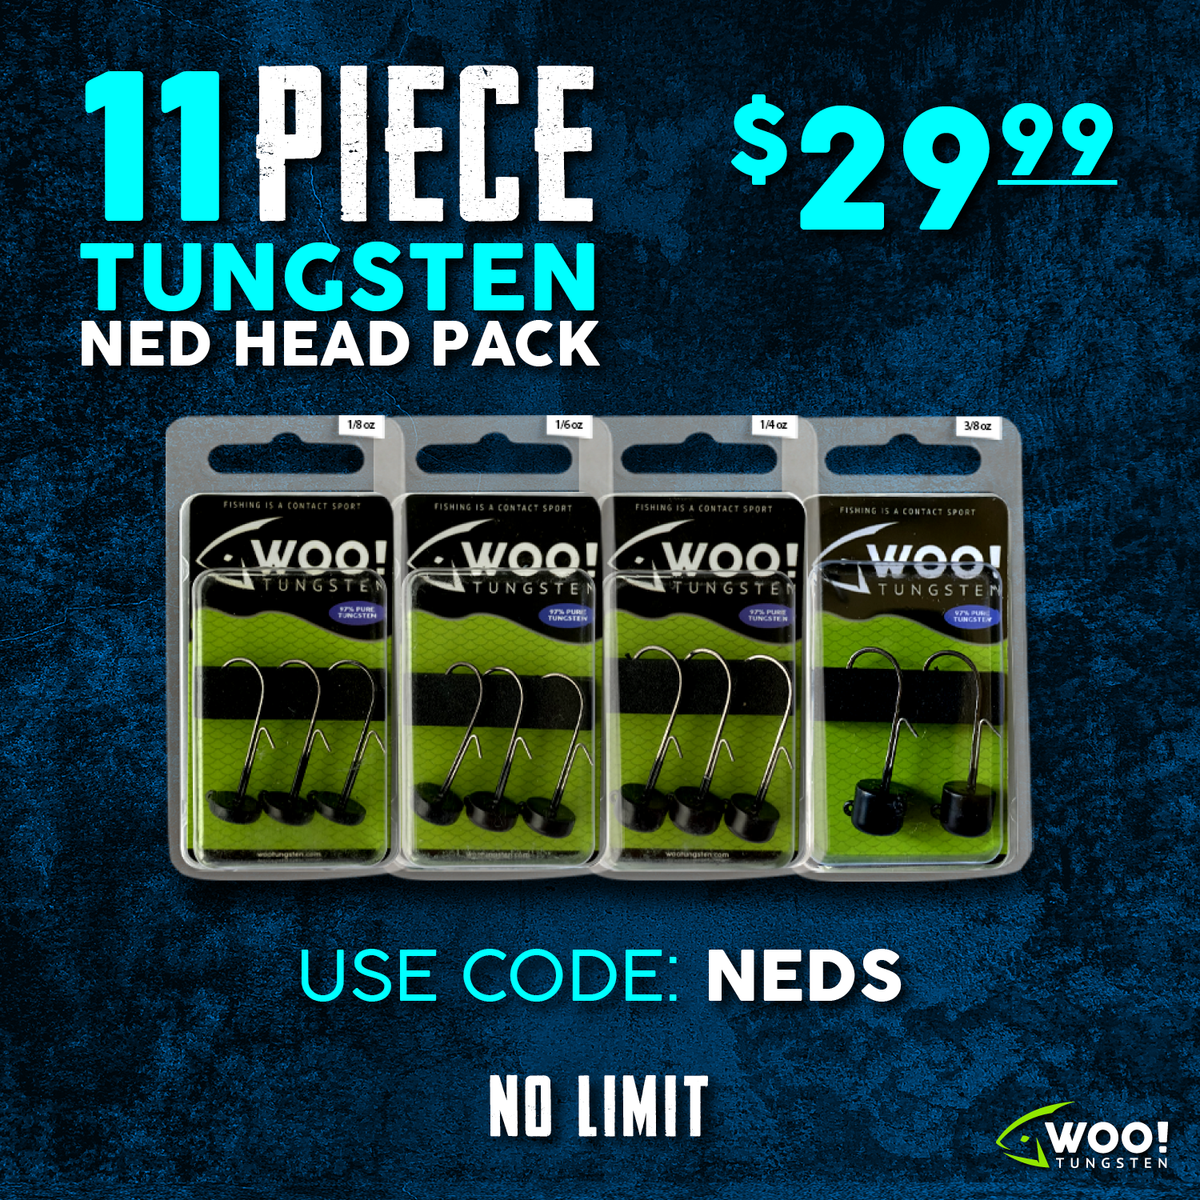 NED PACK - Every Ned Head Size Between 1/8 oz and 3/8 oz - USE CODE